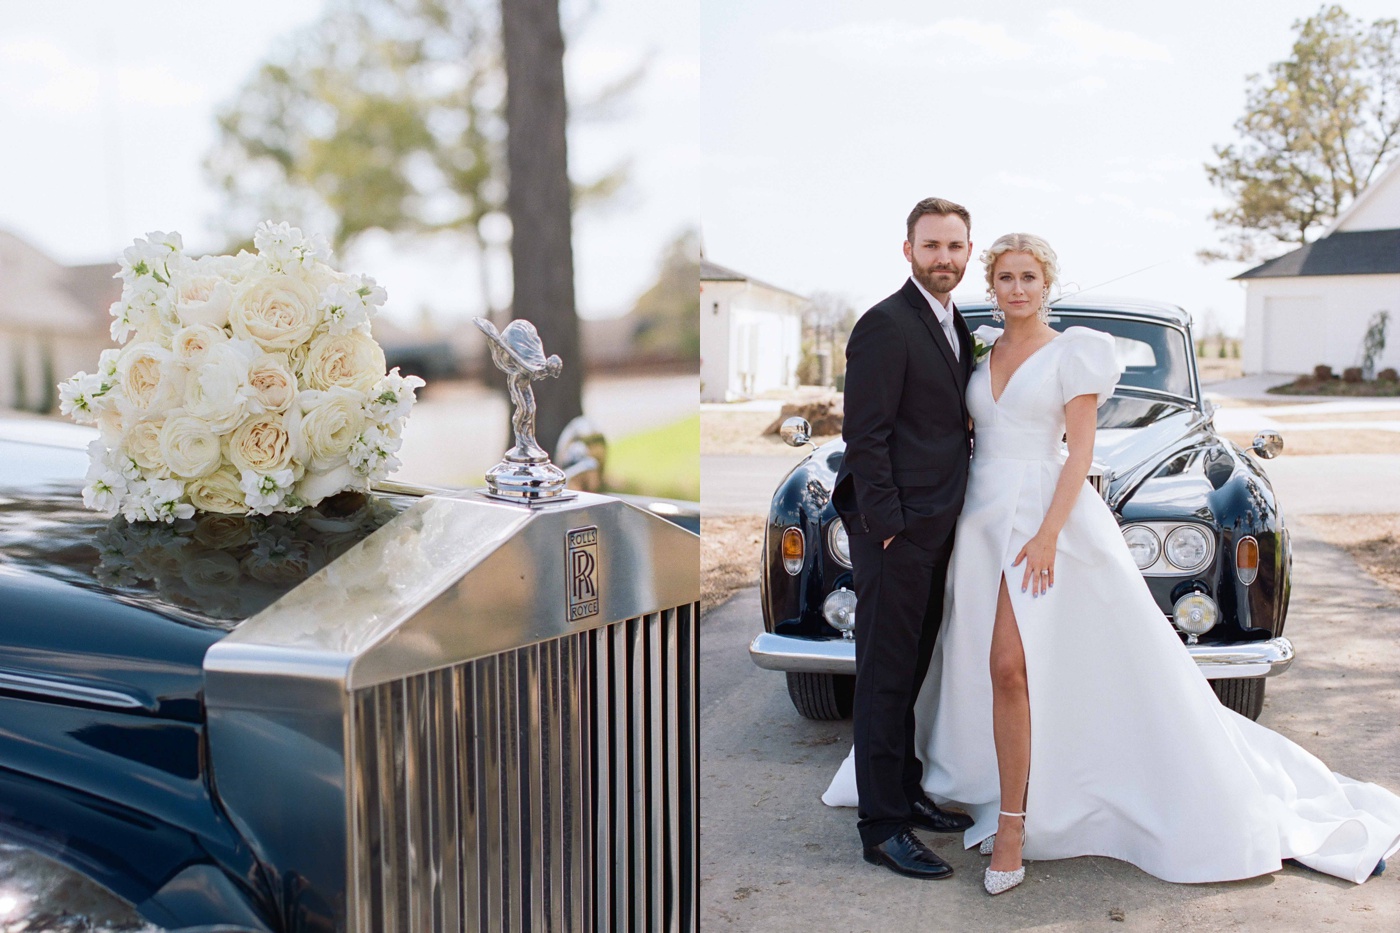 Vintage black Rolls Royce provided by Tulsa Wedding Car for a styled shoot